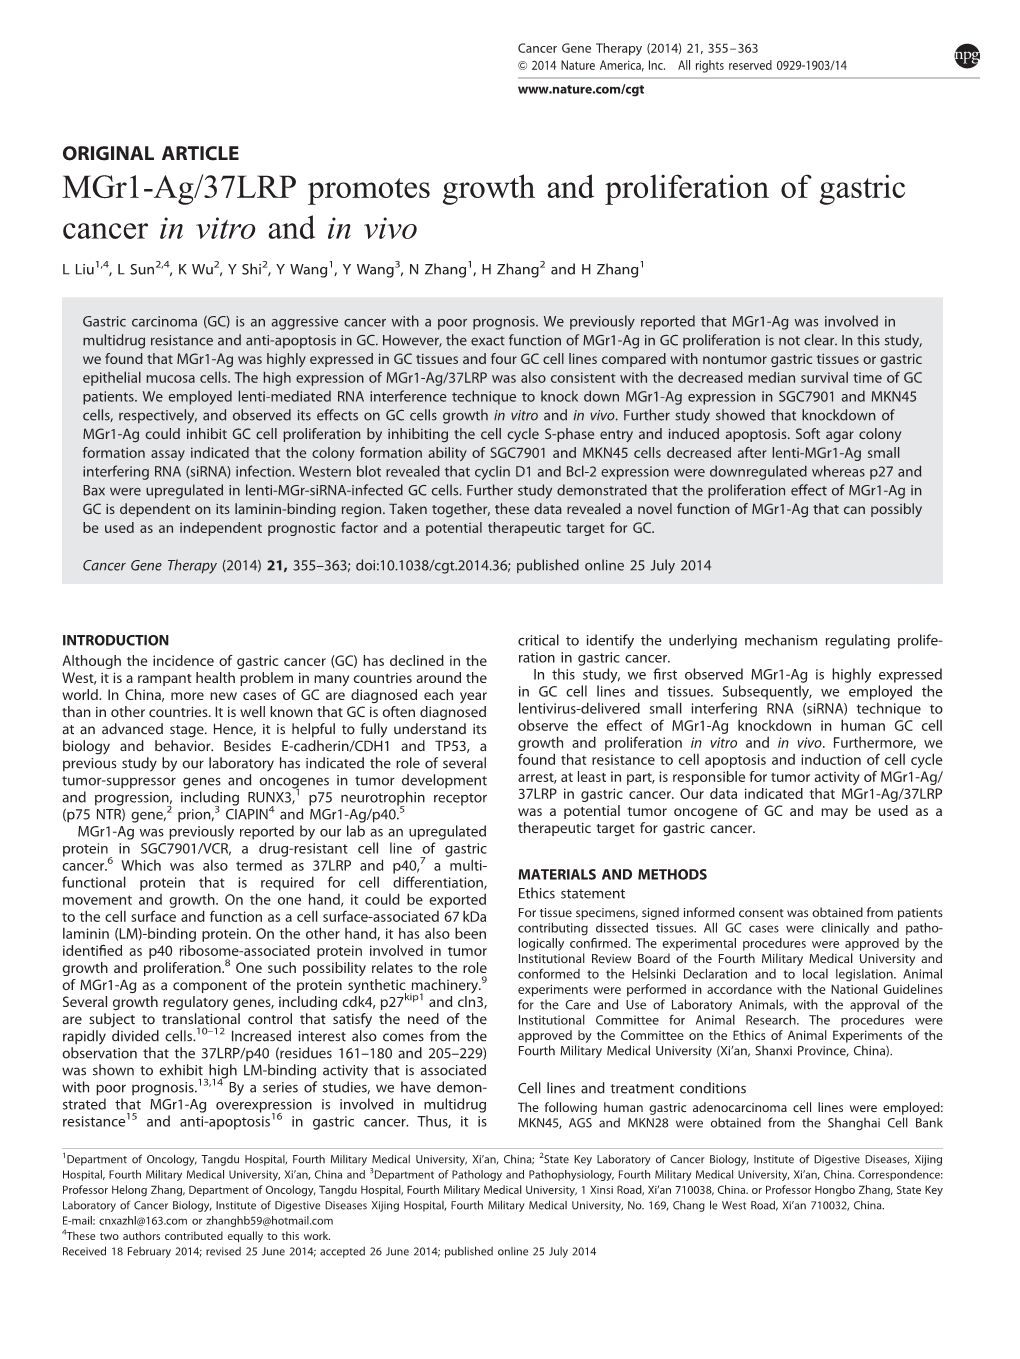 37LRP Promotes Growth and Proliferation of Gastric Cancer in Vitro and in Vivo